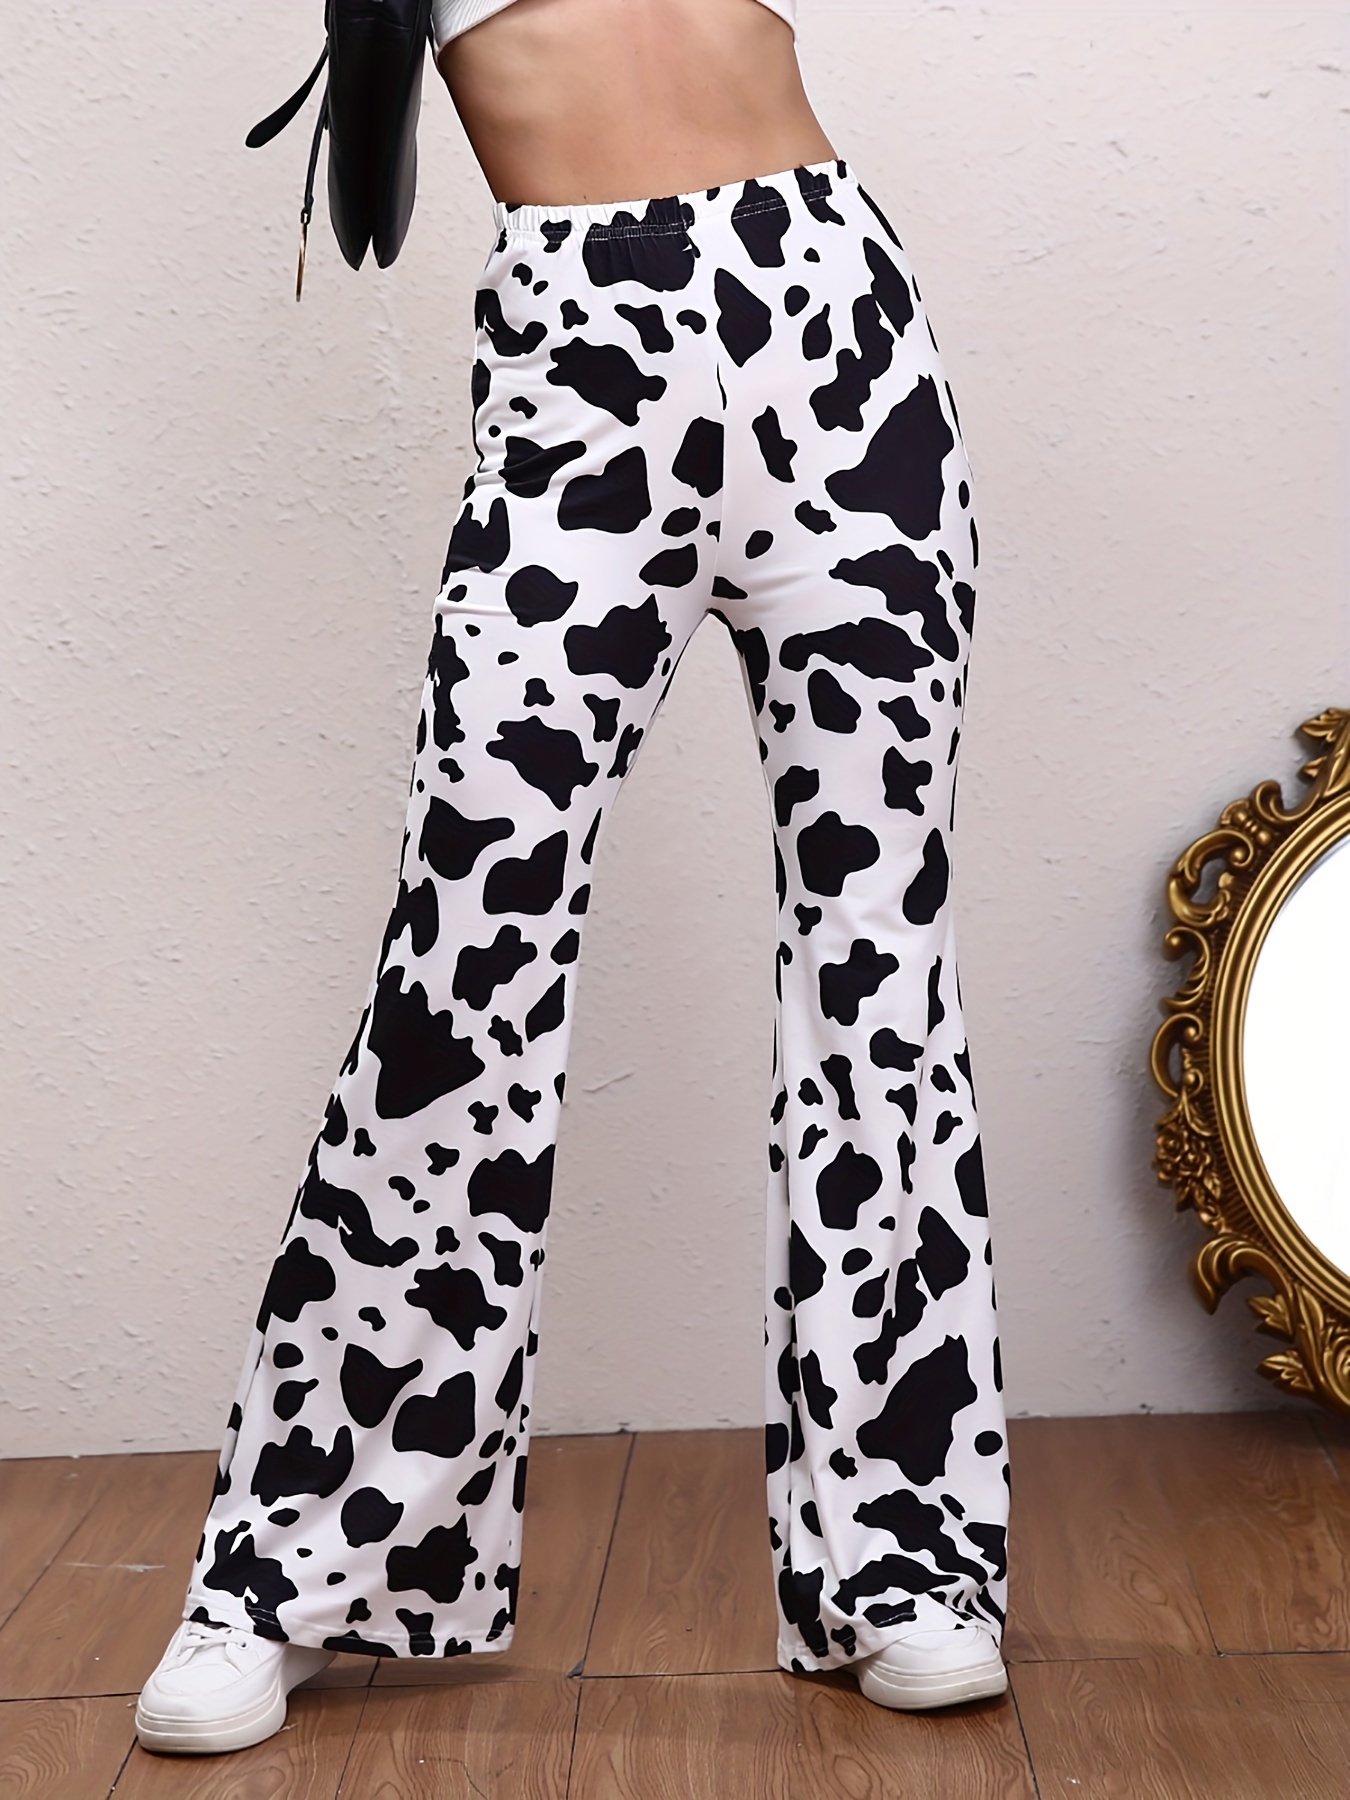 Cow Print Leggings, Black and White, Cow Tights, High-waisted, Animal Print,  Yoga Pants, Boho Activewear, Gym Wear, Women Cow Theme Clothes 